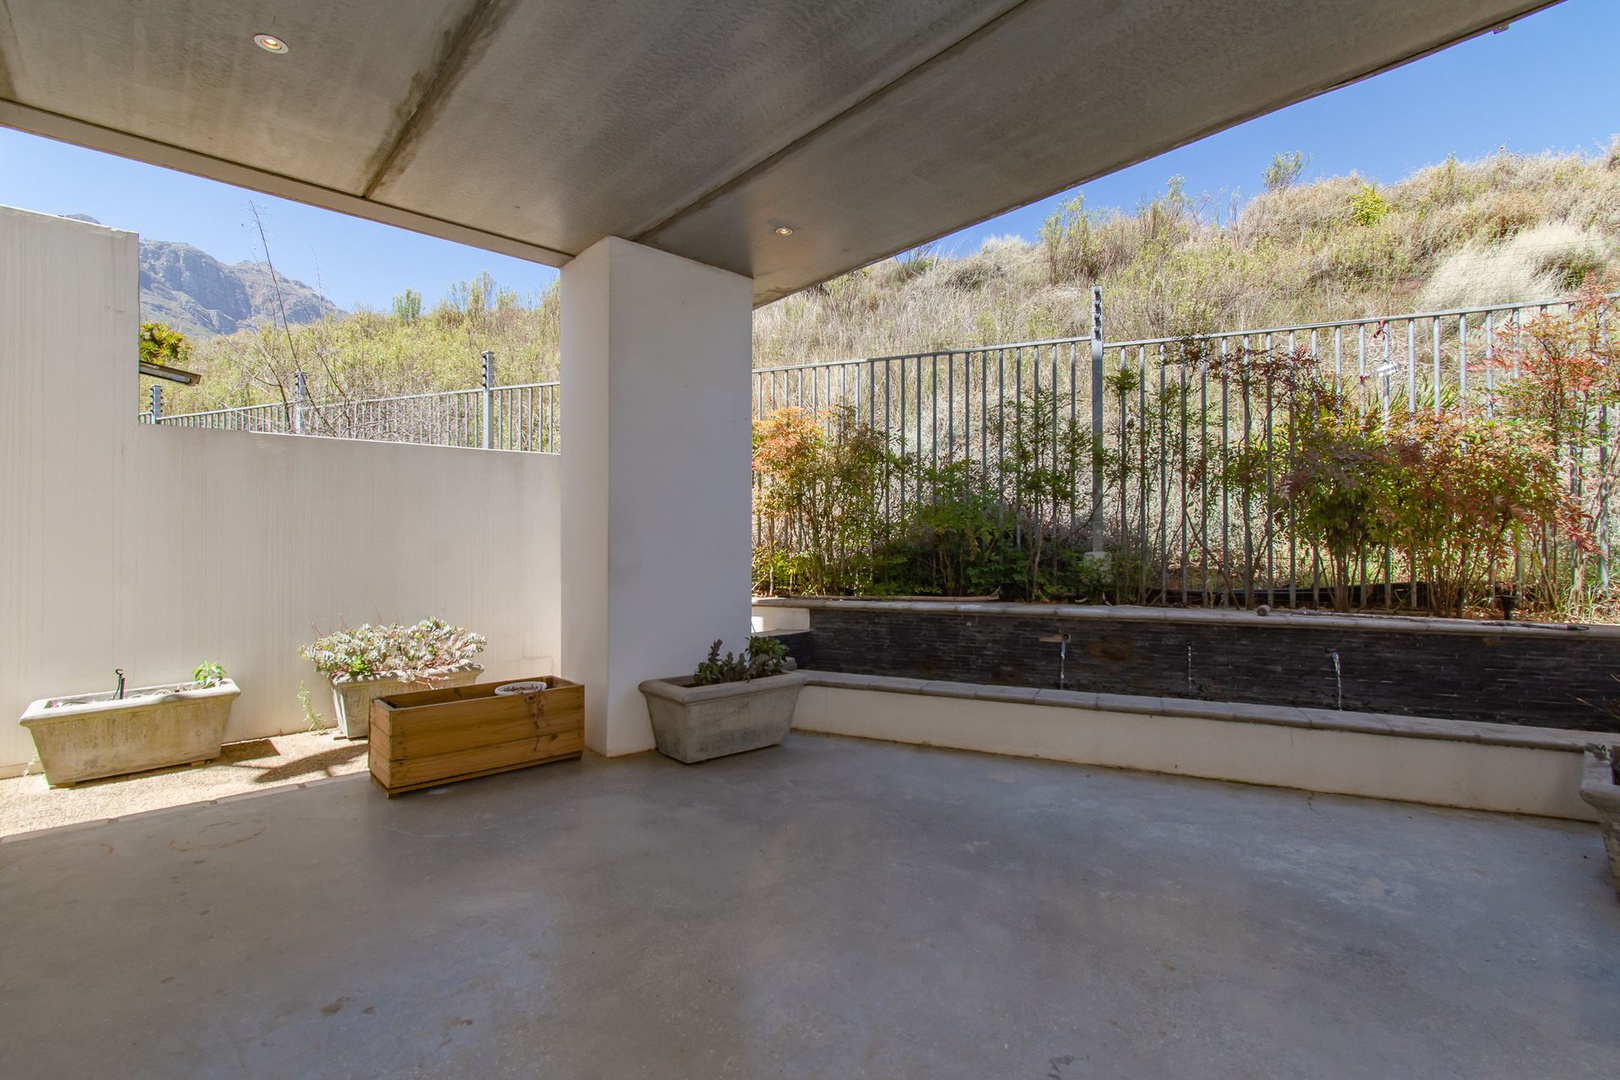 House in Brandwacht aan Rivier - Private Outdoor Courtyard With Mountain Views And Shower